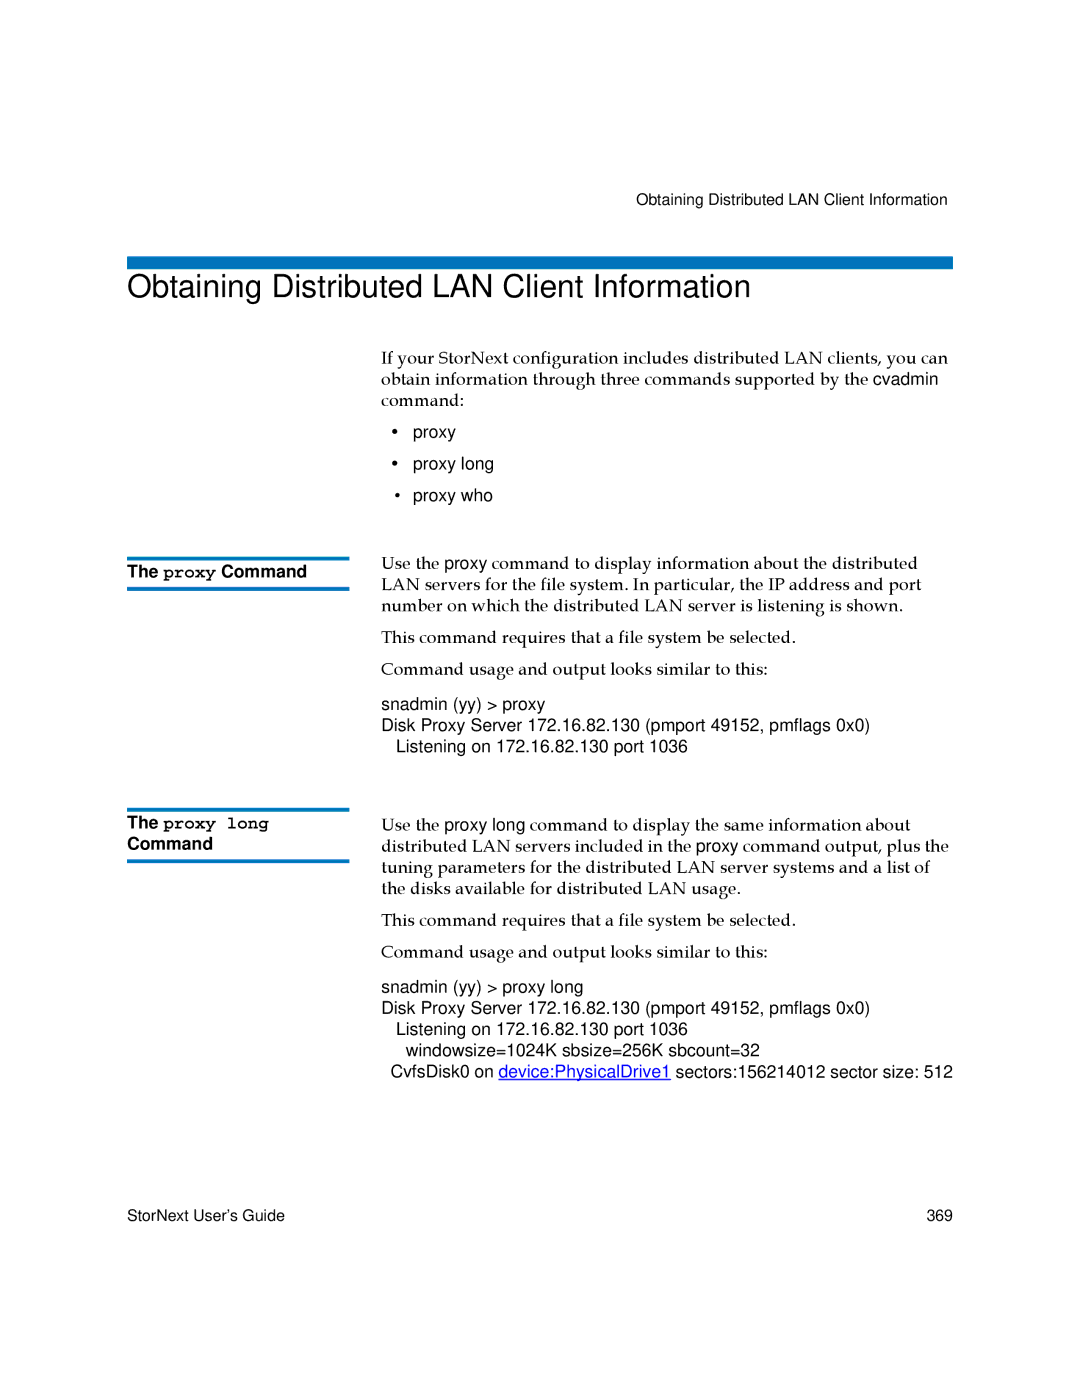 Quantum 3.5.1 manual Obtaining Distributed LAN Client Information, Proxy Command 